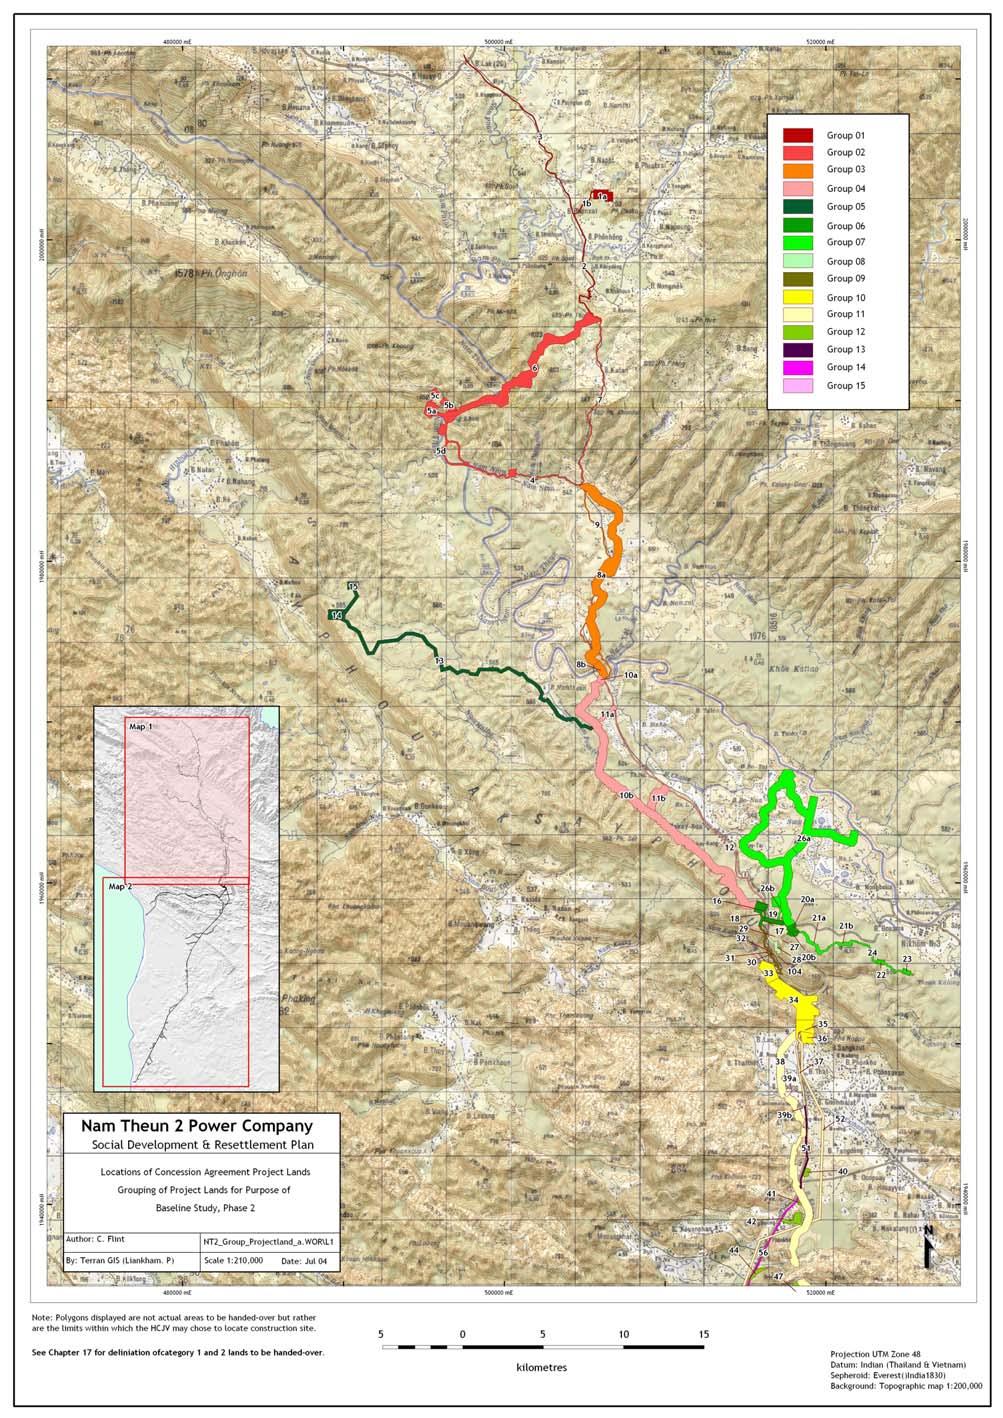 Figure 1-2: Map of Project Land Areas (not including Transmission Lines), Subject to